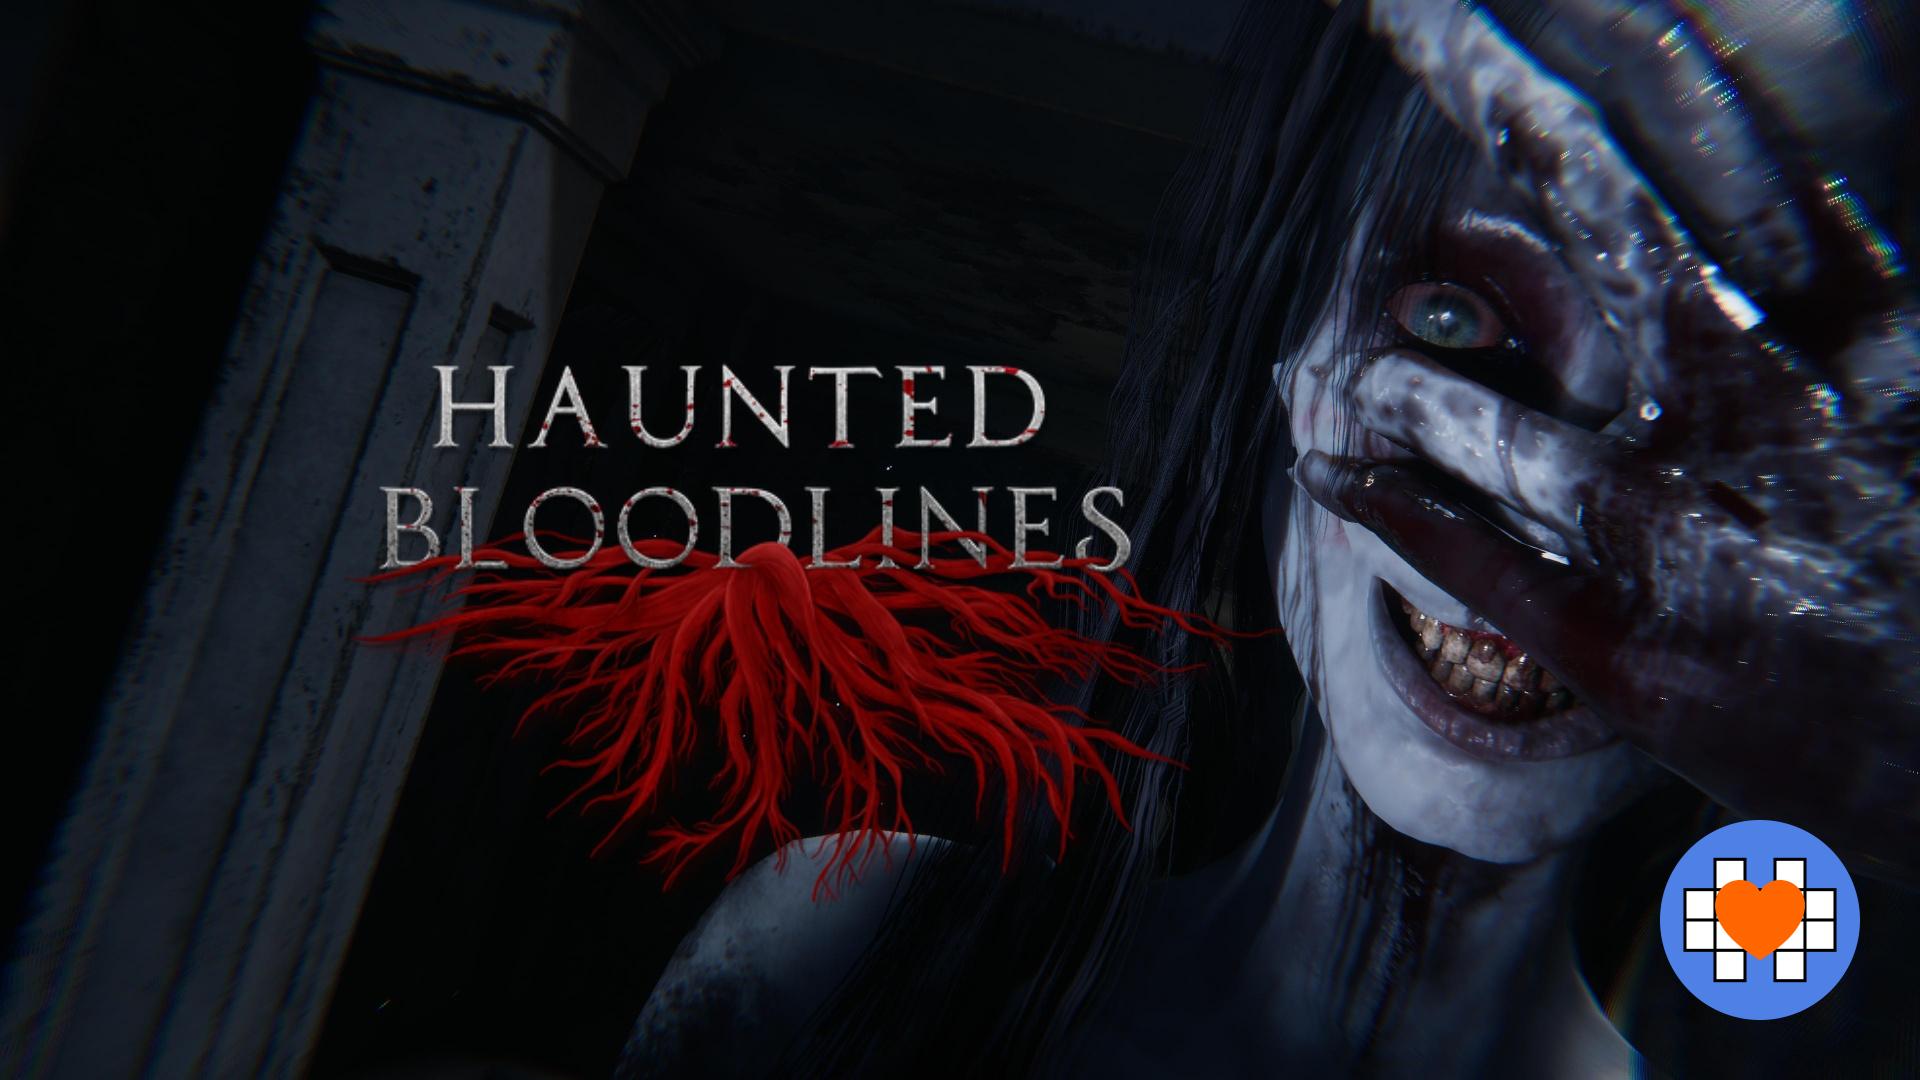 Haunted Bloodlines – Preview of a Spectral Horror